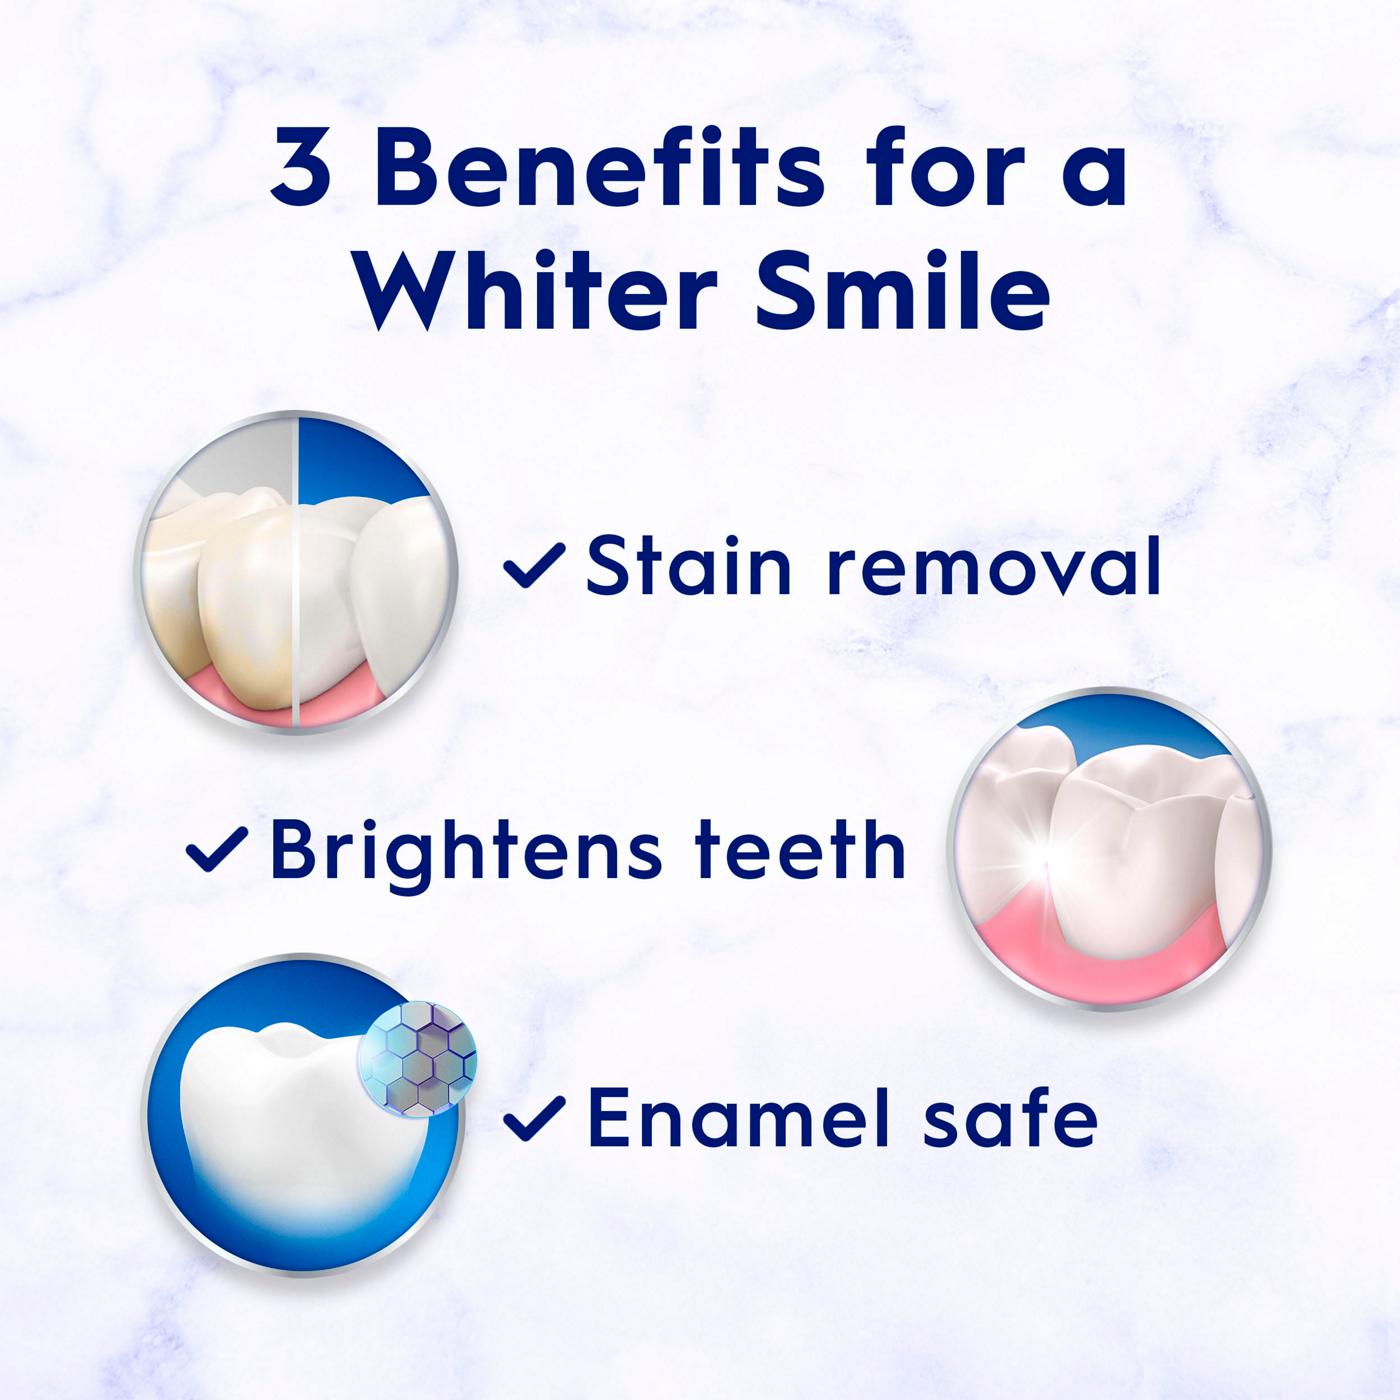 Crest 3D White Whitening Toothpaste - Charcoal; image 7 of 7